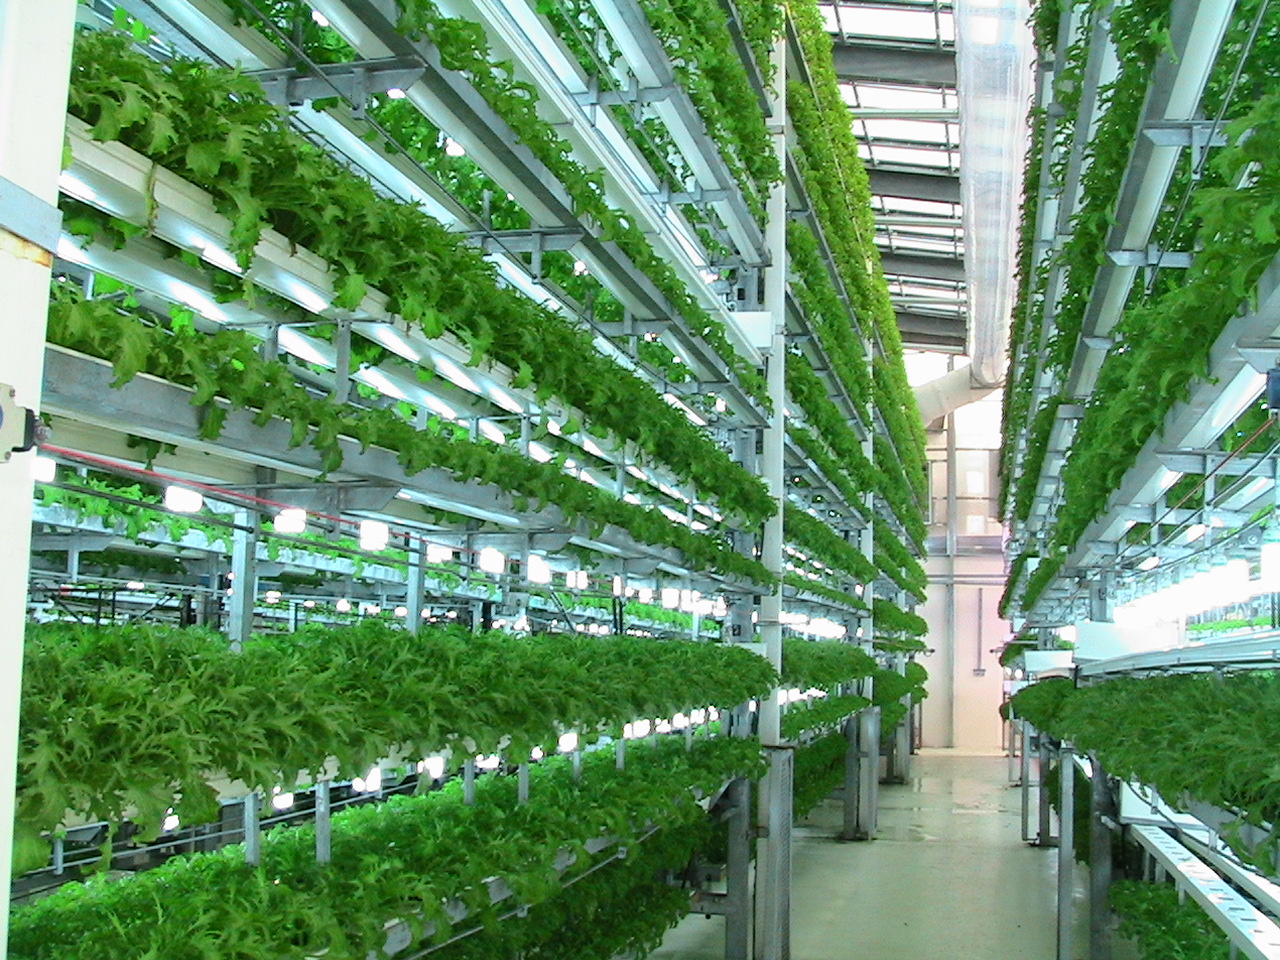 Vertical Hydroponic Farming Systems